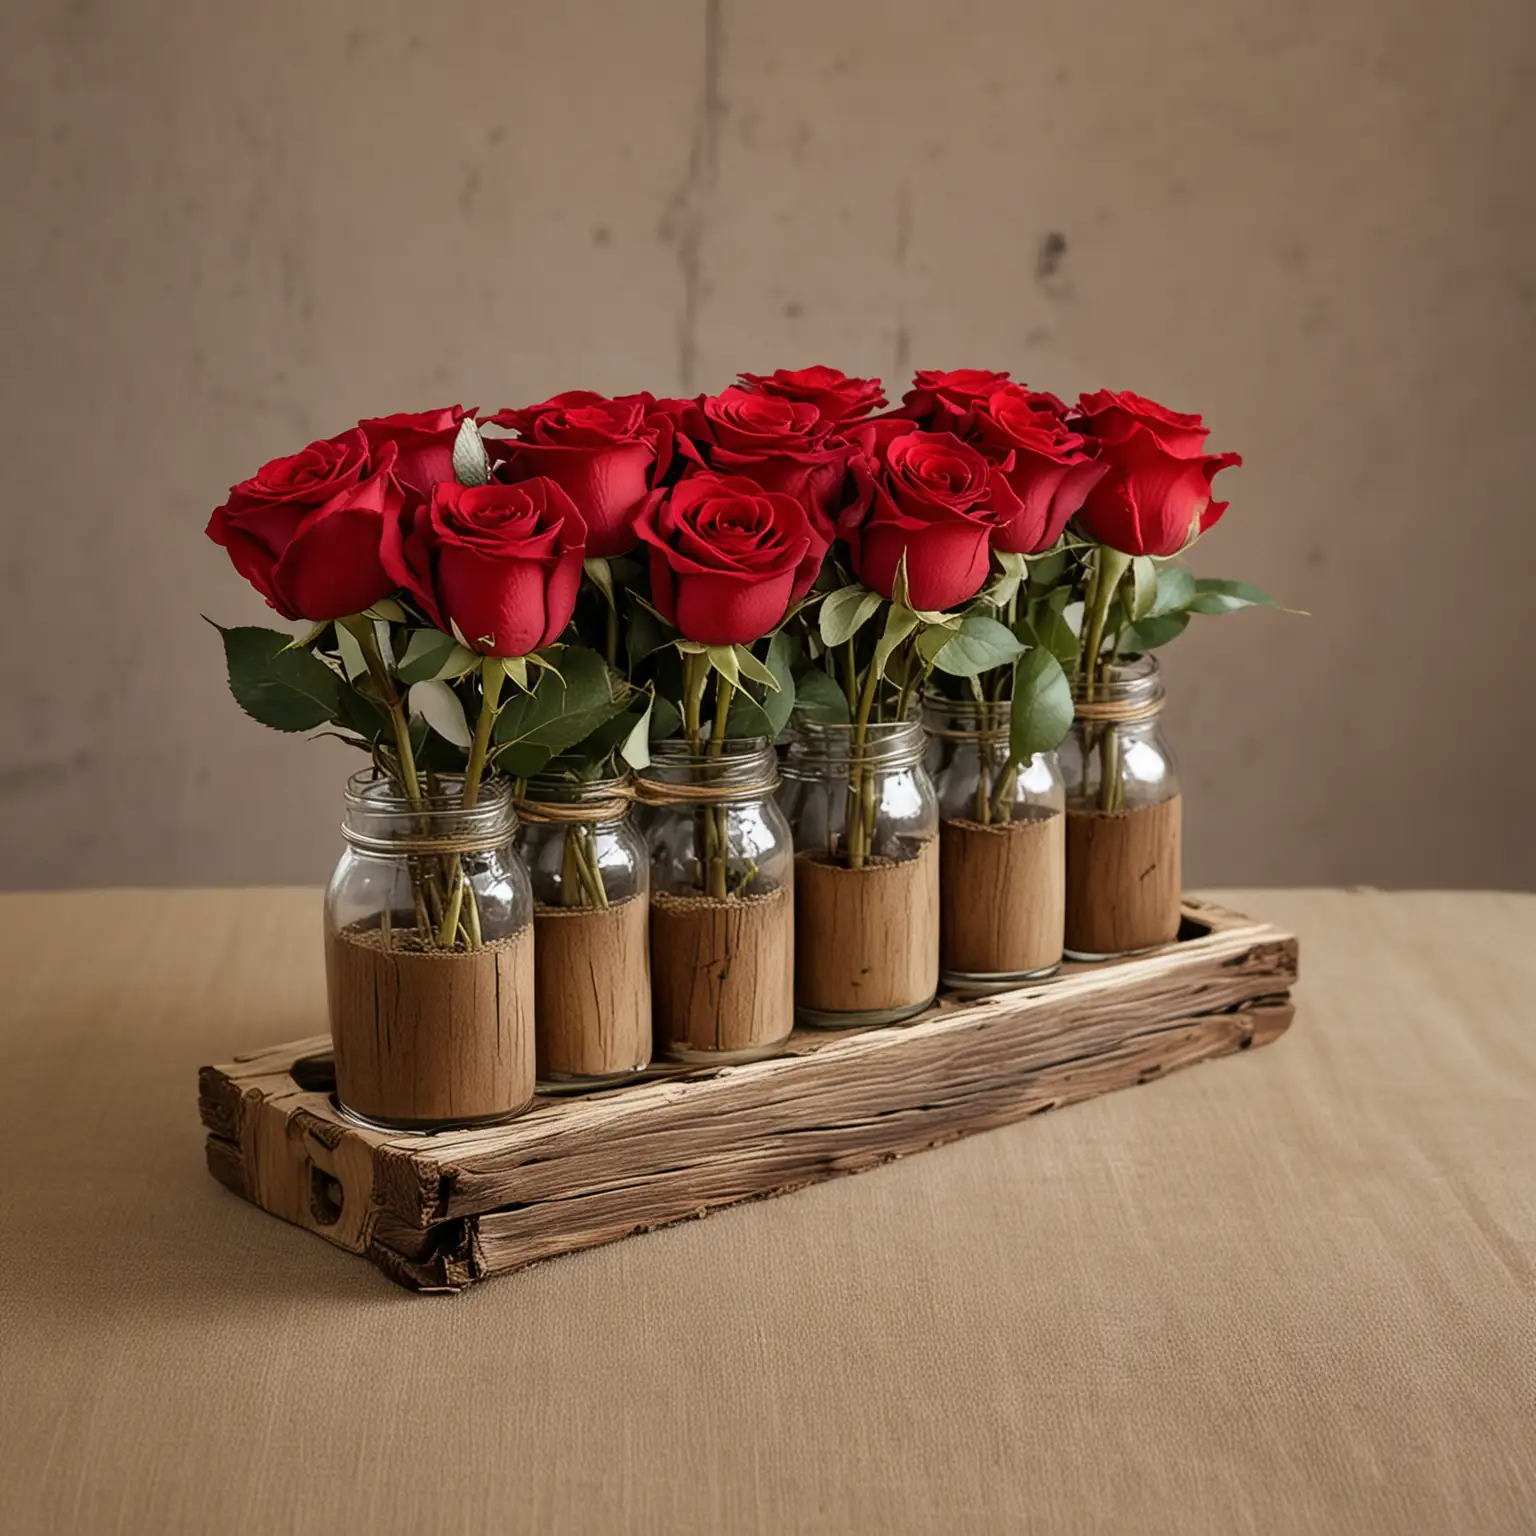 Rustic-Wedding-Centerpiece-with-Red-Roses